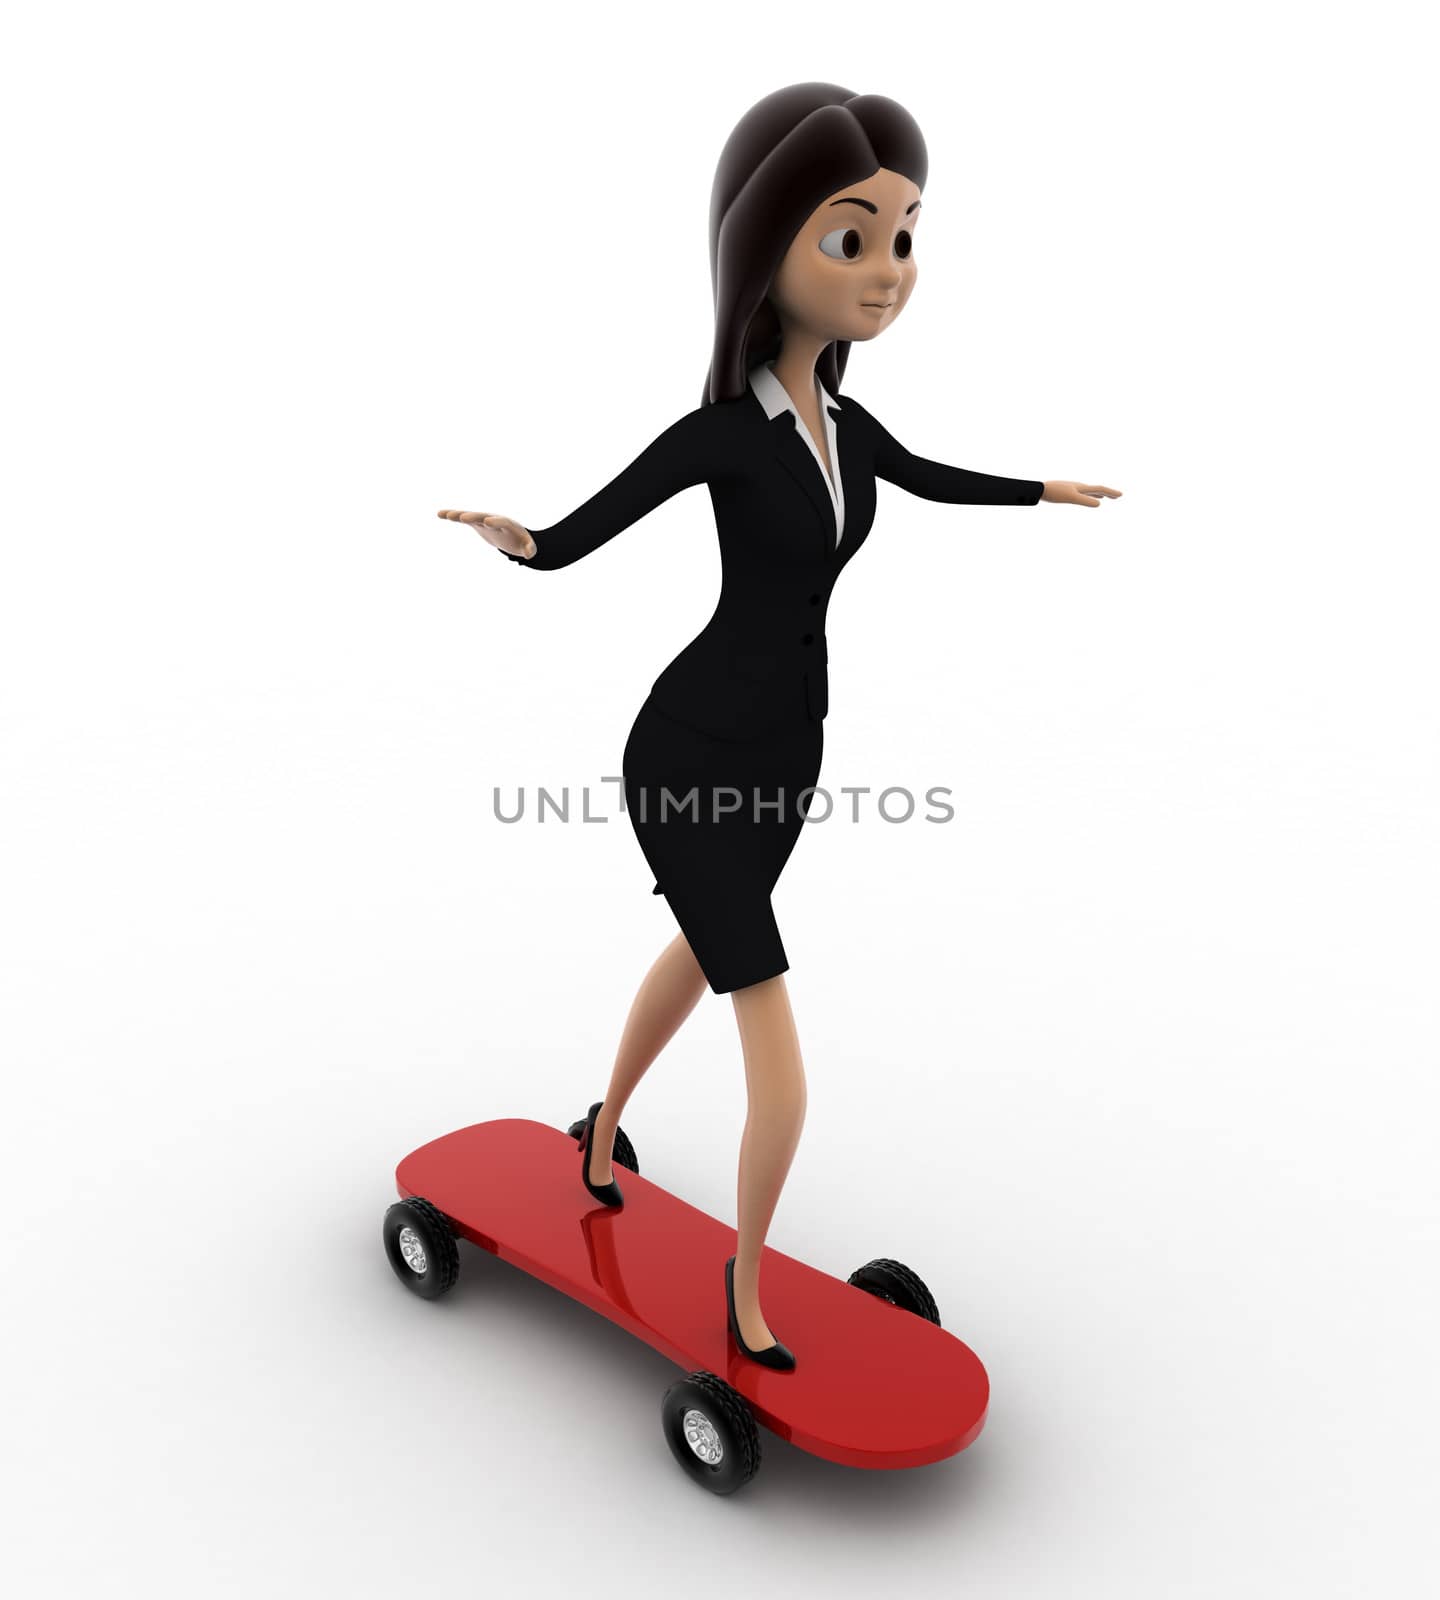 3d woman skating on skateboard concept on white background, side angle view